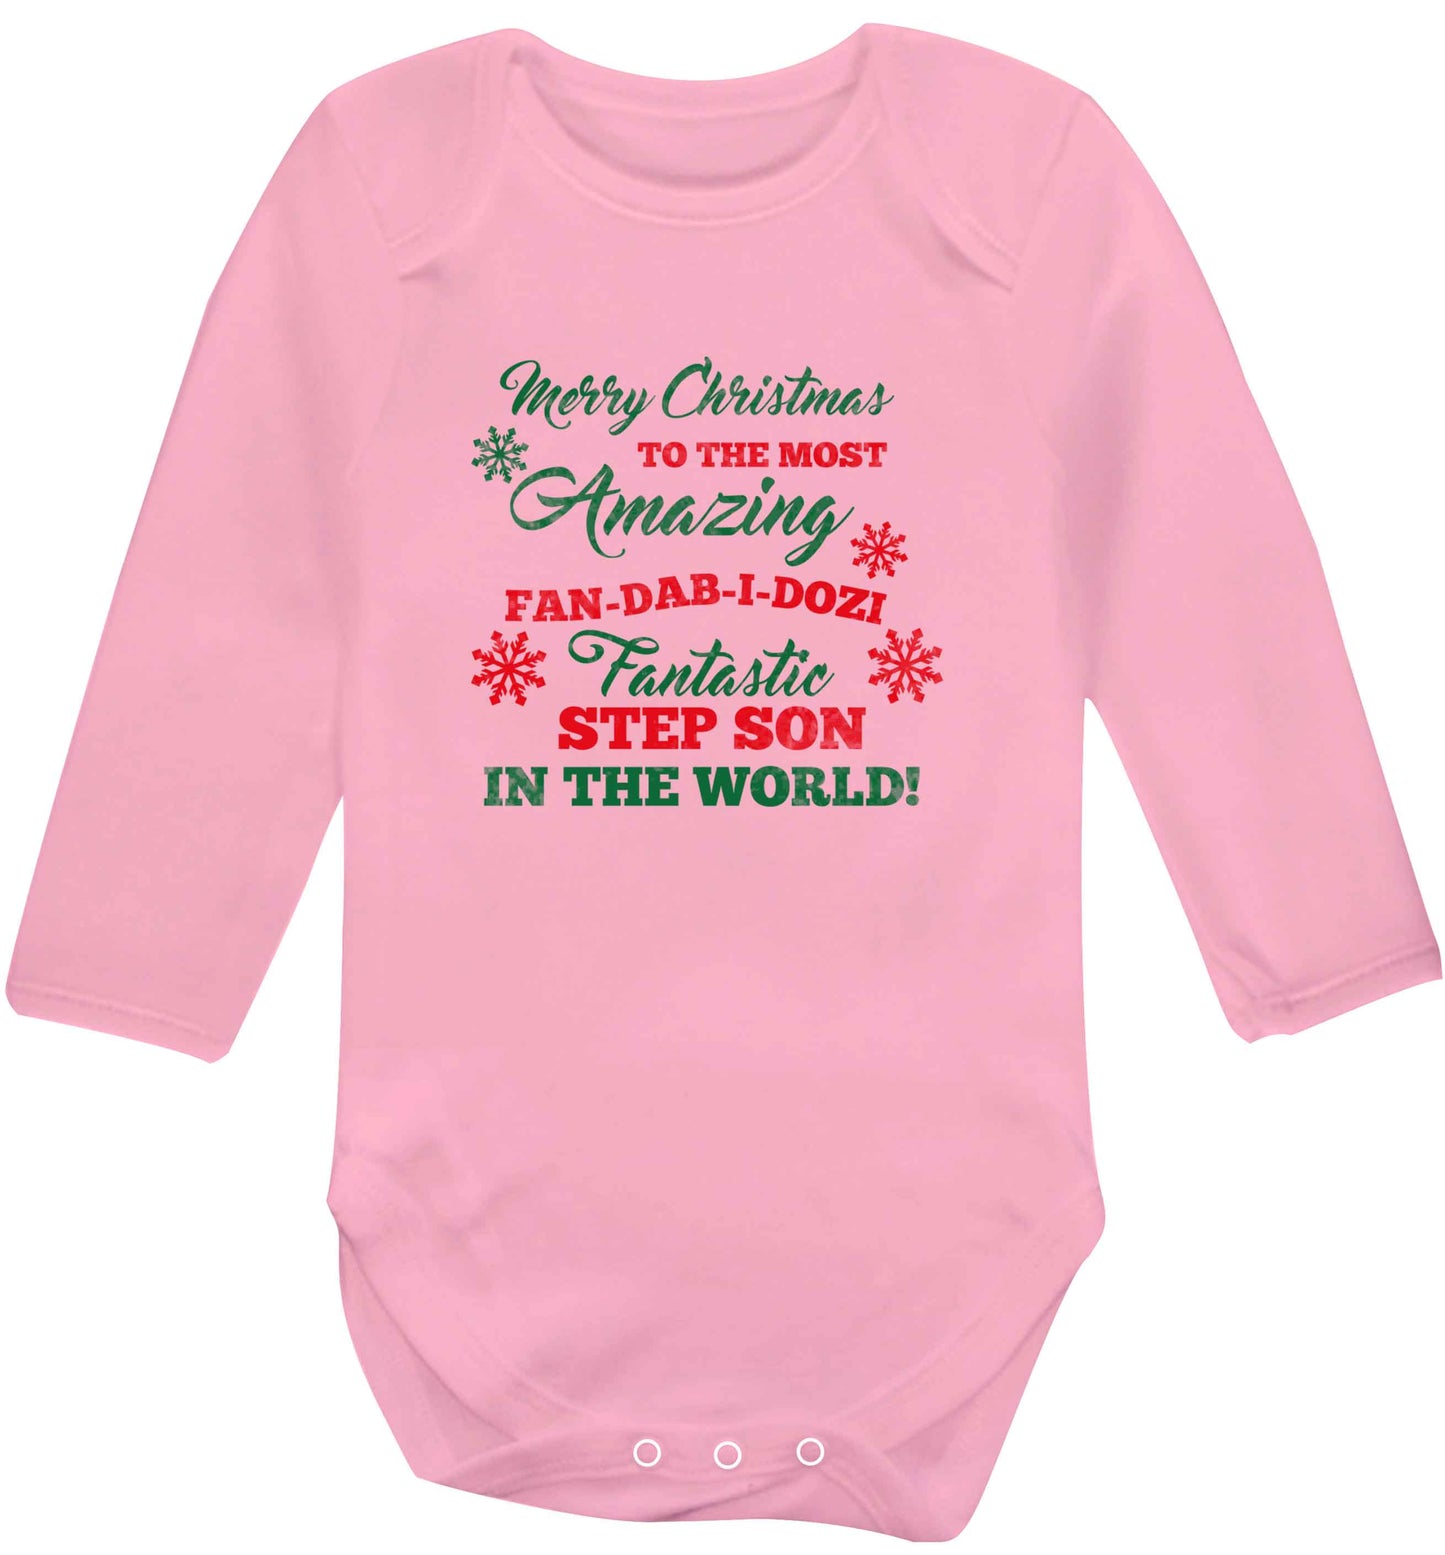 Merry Christmas to the most amazing fan-dab-i-dozi fantasic Step Son in the world baby vest long sleeved pale pink 6-12 months